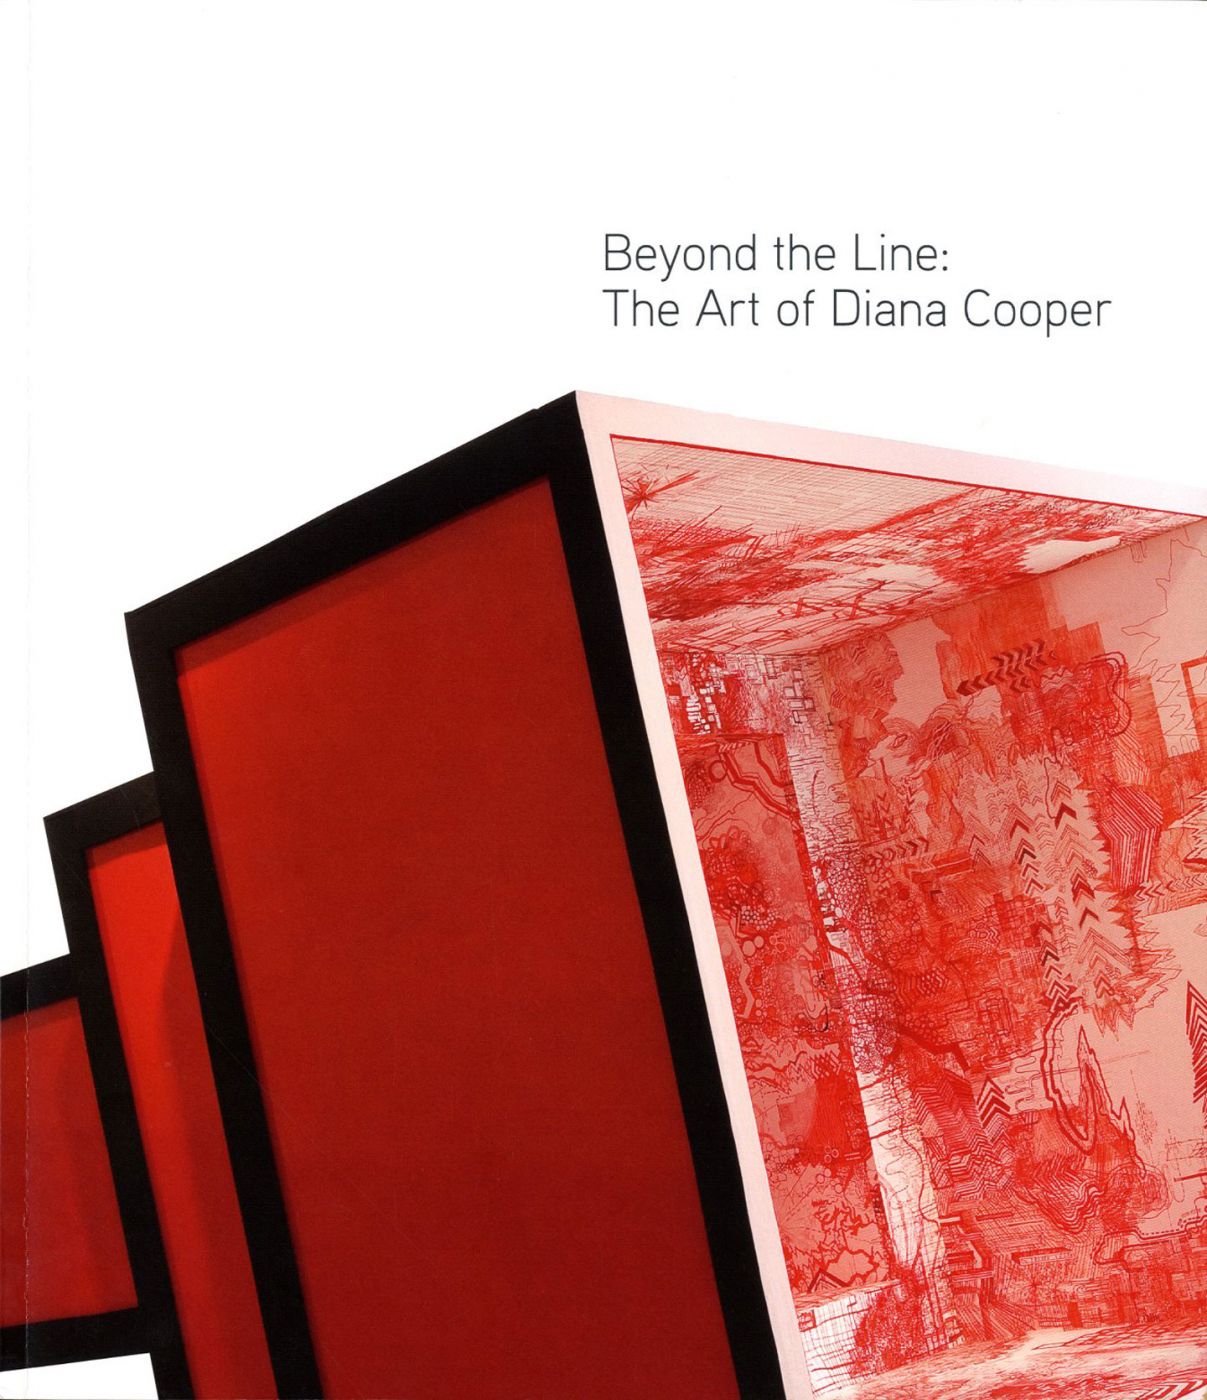 Beyond The Line: The Art of Diana Cooper